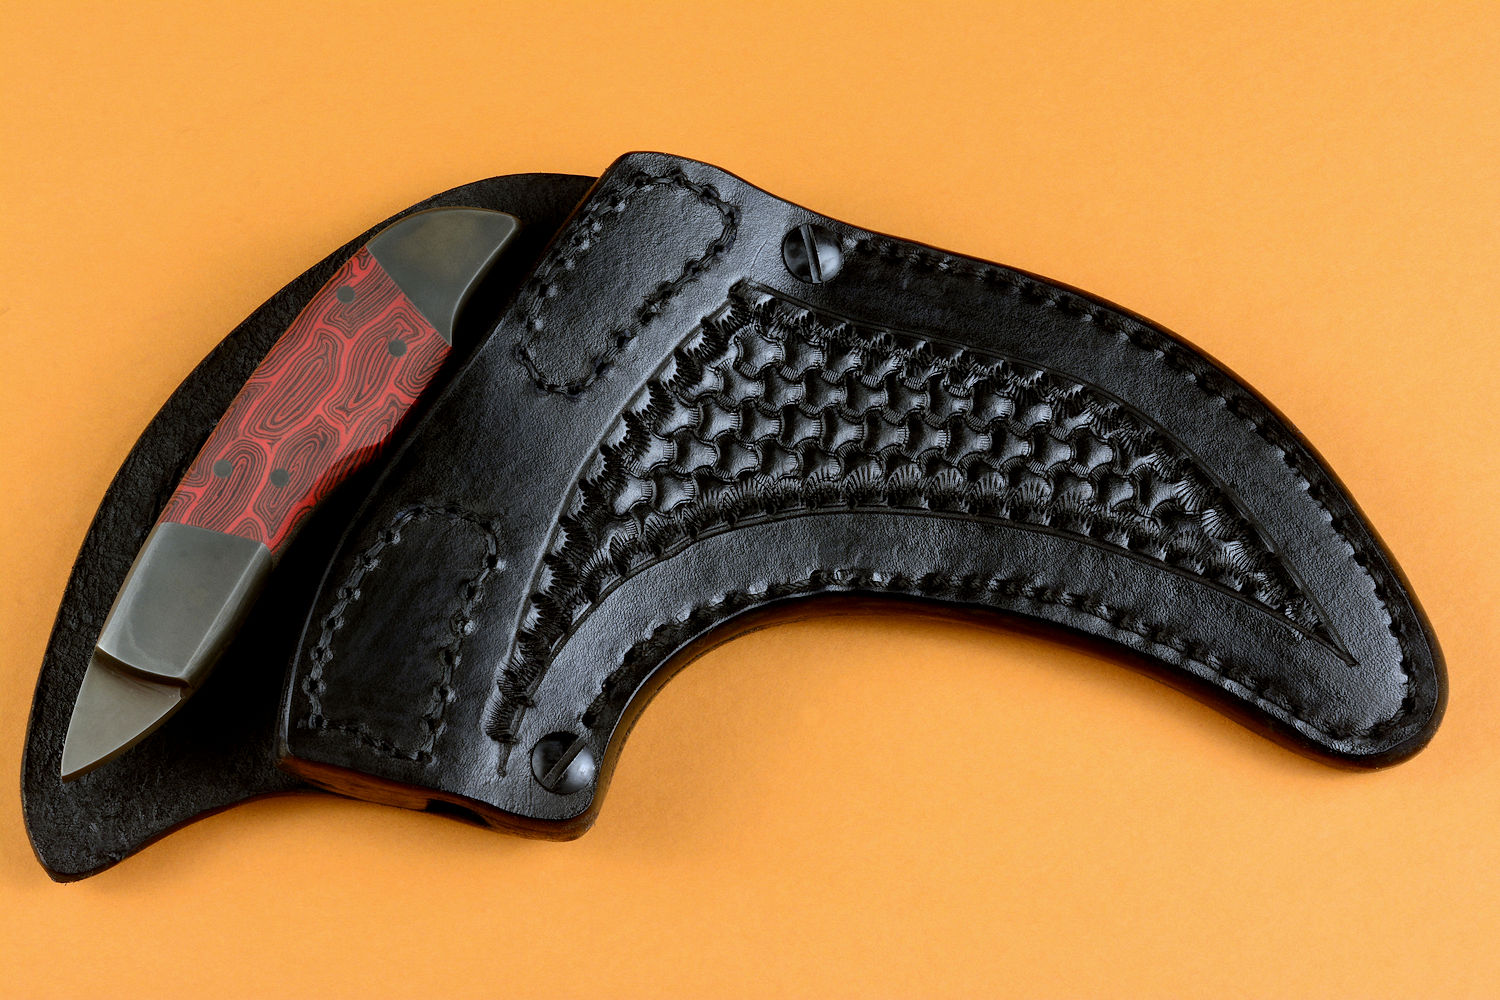 "Chela" karambit knife, post-lock leather sheath detail  in T4 cryogenically treated 440C high chromium martensitic stainless steel blade, 304 stainless steel bolsters, red and black tortoiseshell G10 composite handle, leather sheath with stainless steel and nylon